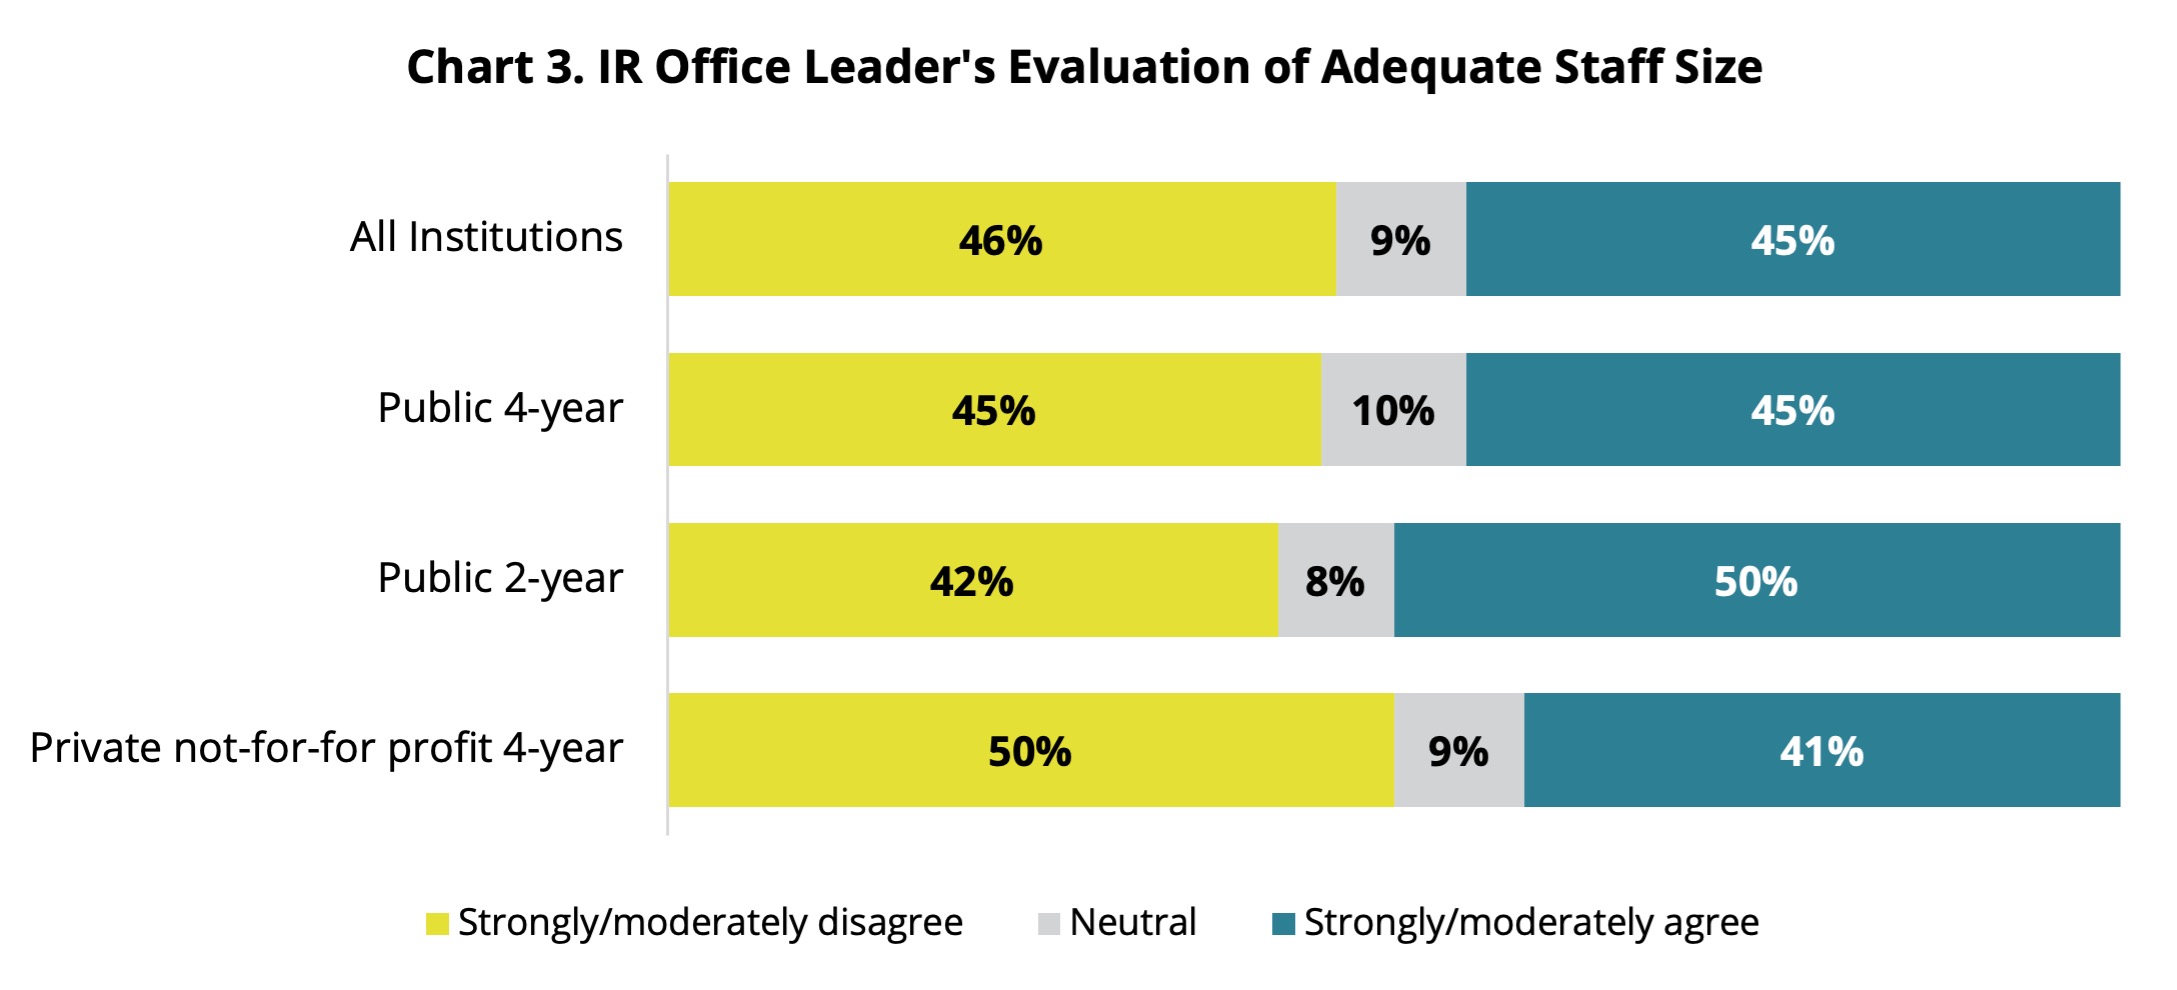 Chart 3. IR Office Leader
                's Evaluation of Adequate Staff Size